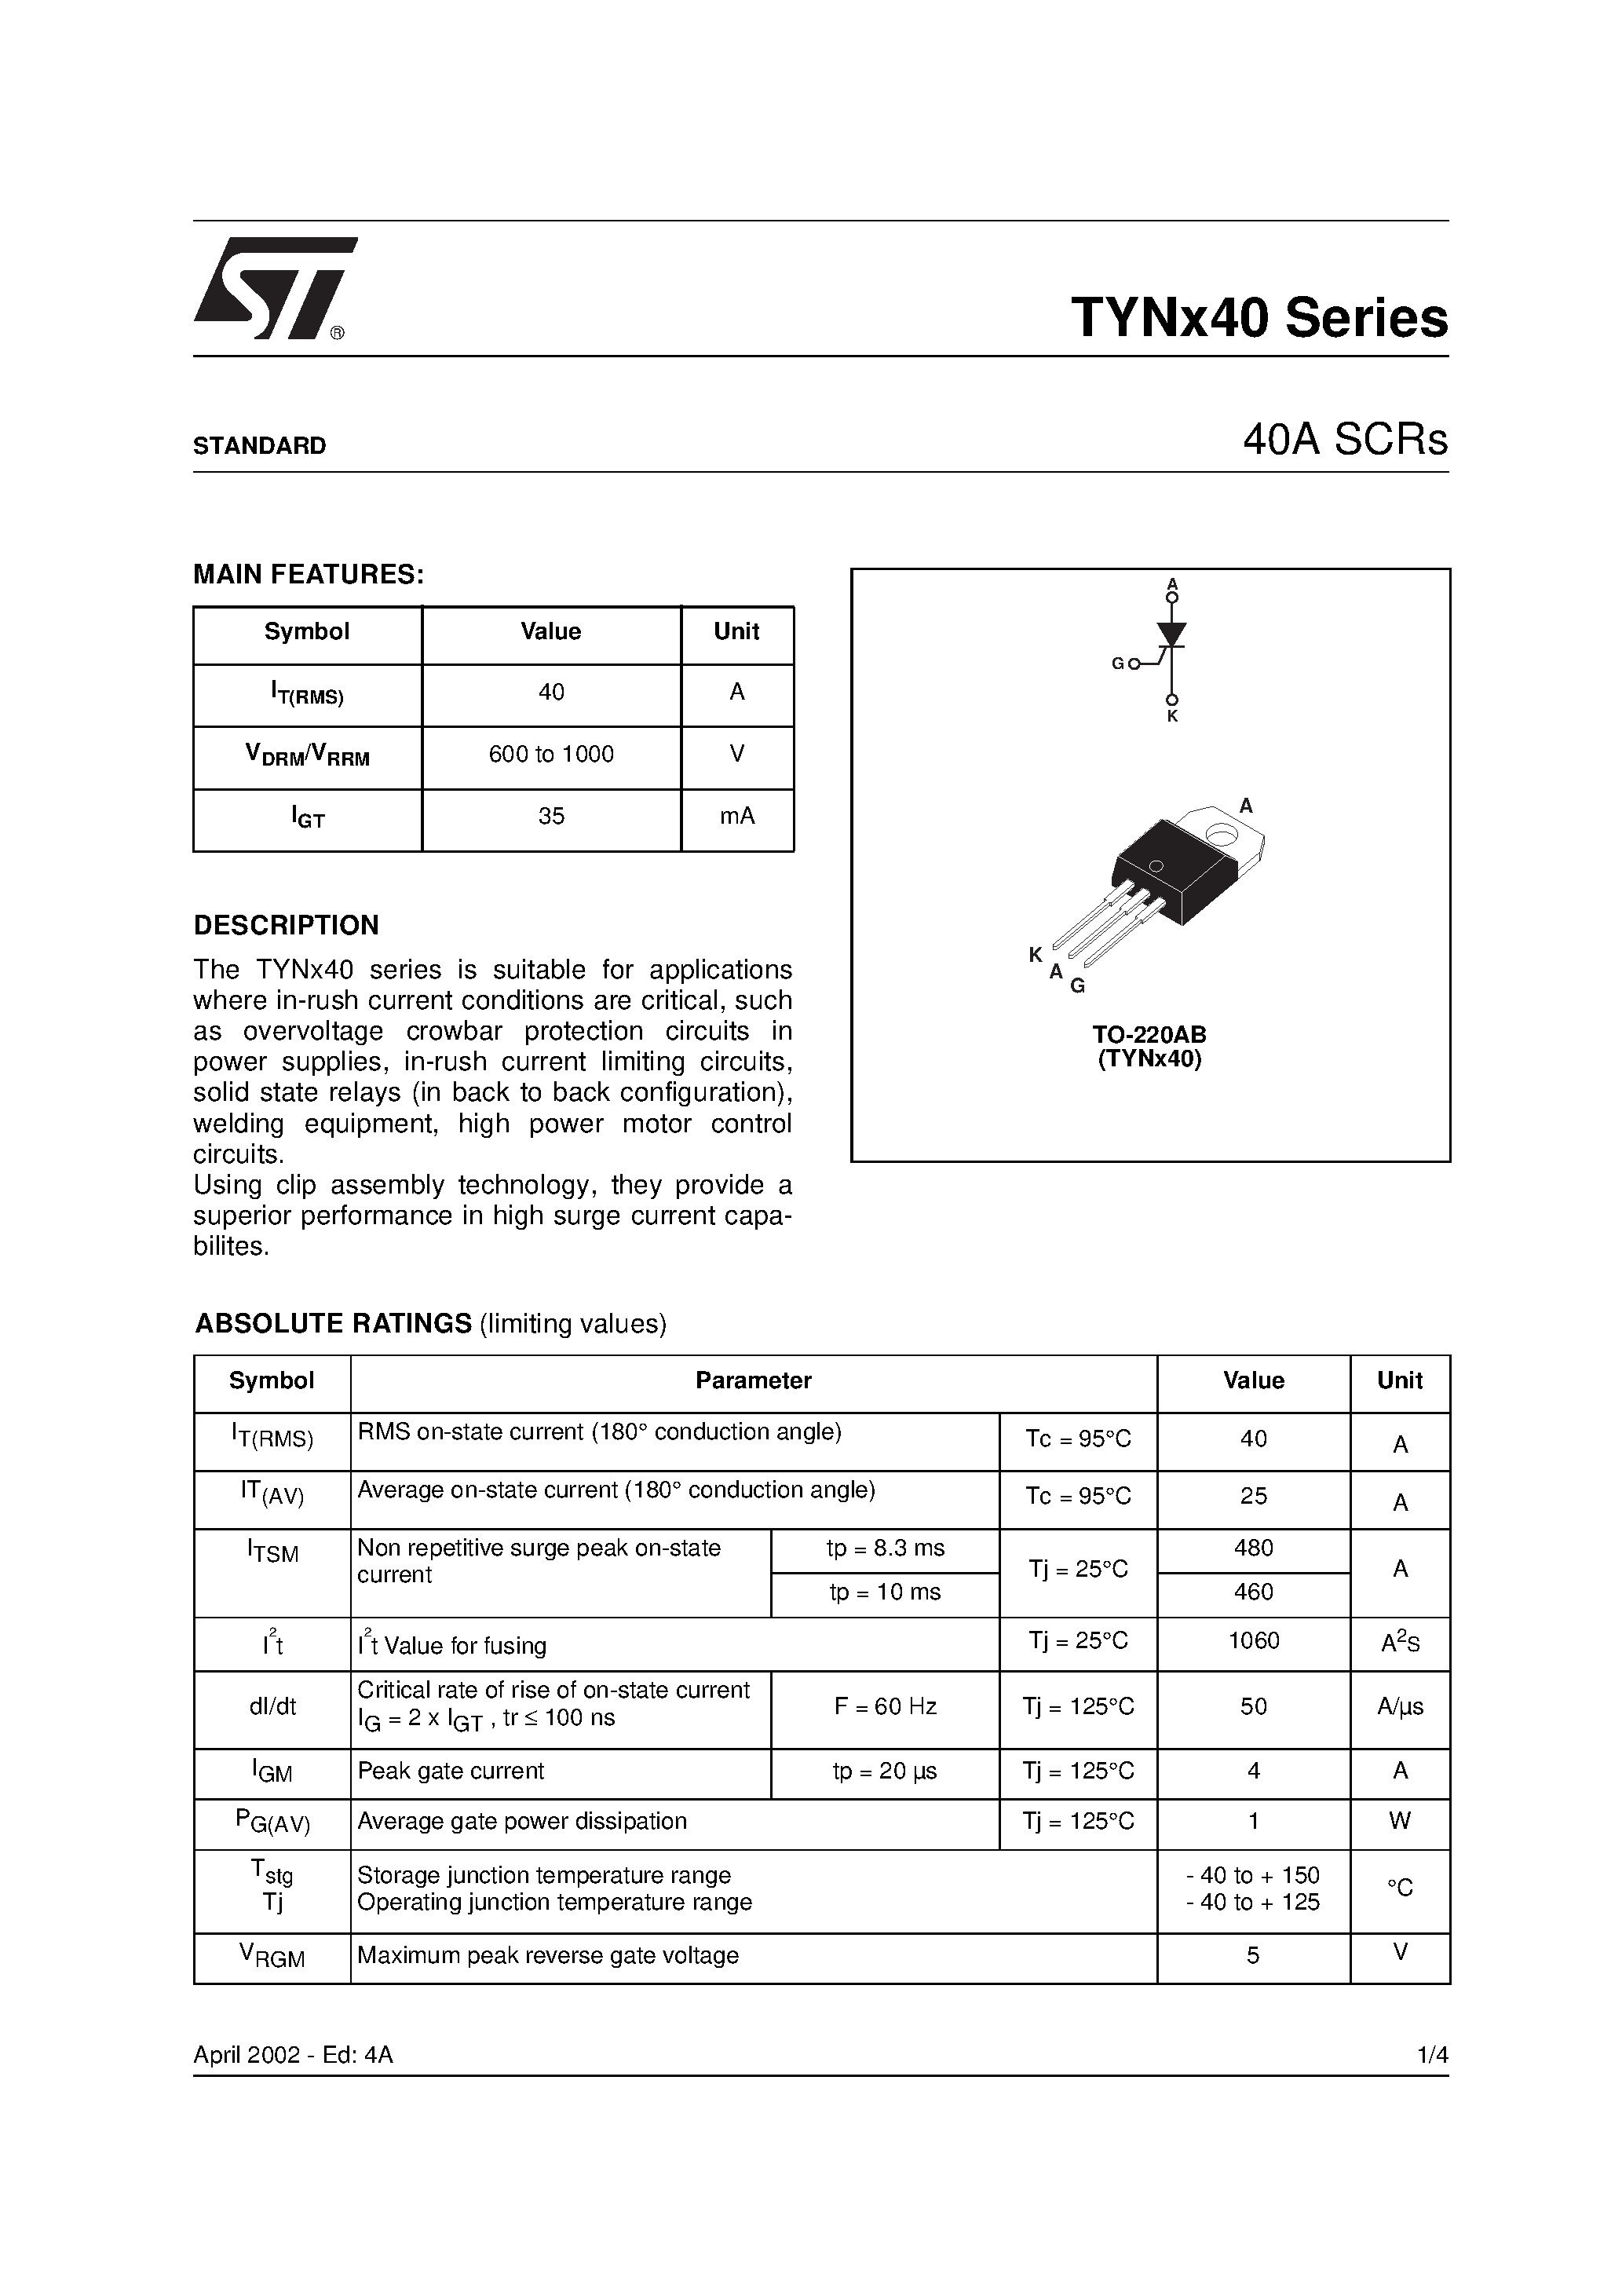 Datasheet TYNX40 - 40A SCRs page 1